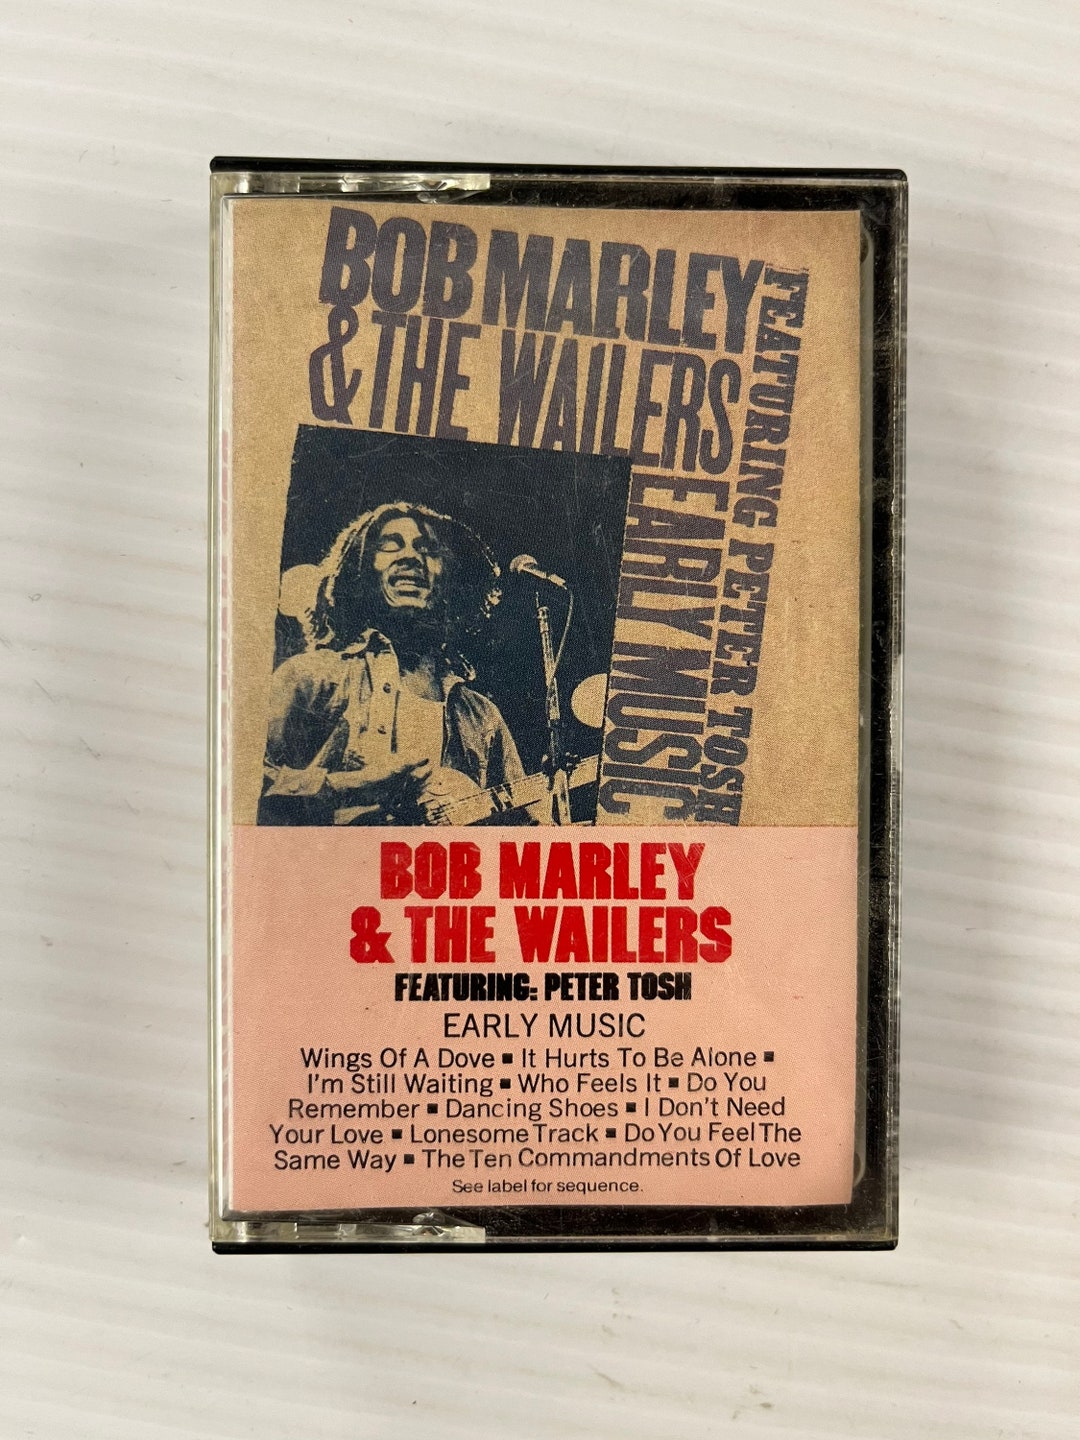 Bob Marley and the Wailers Early Music Featuring Peter Tosh Etsy Hong Kong